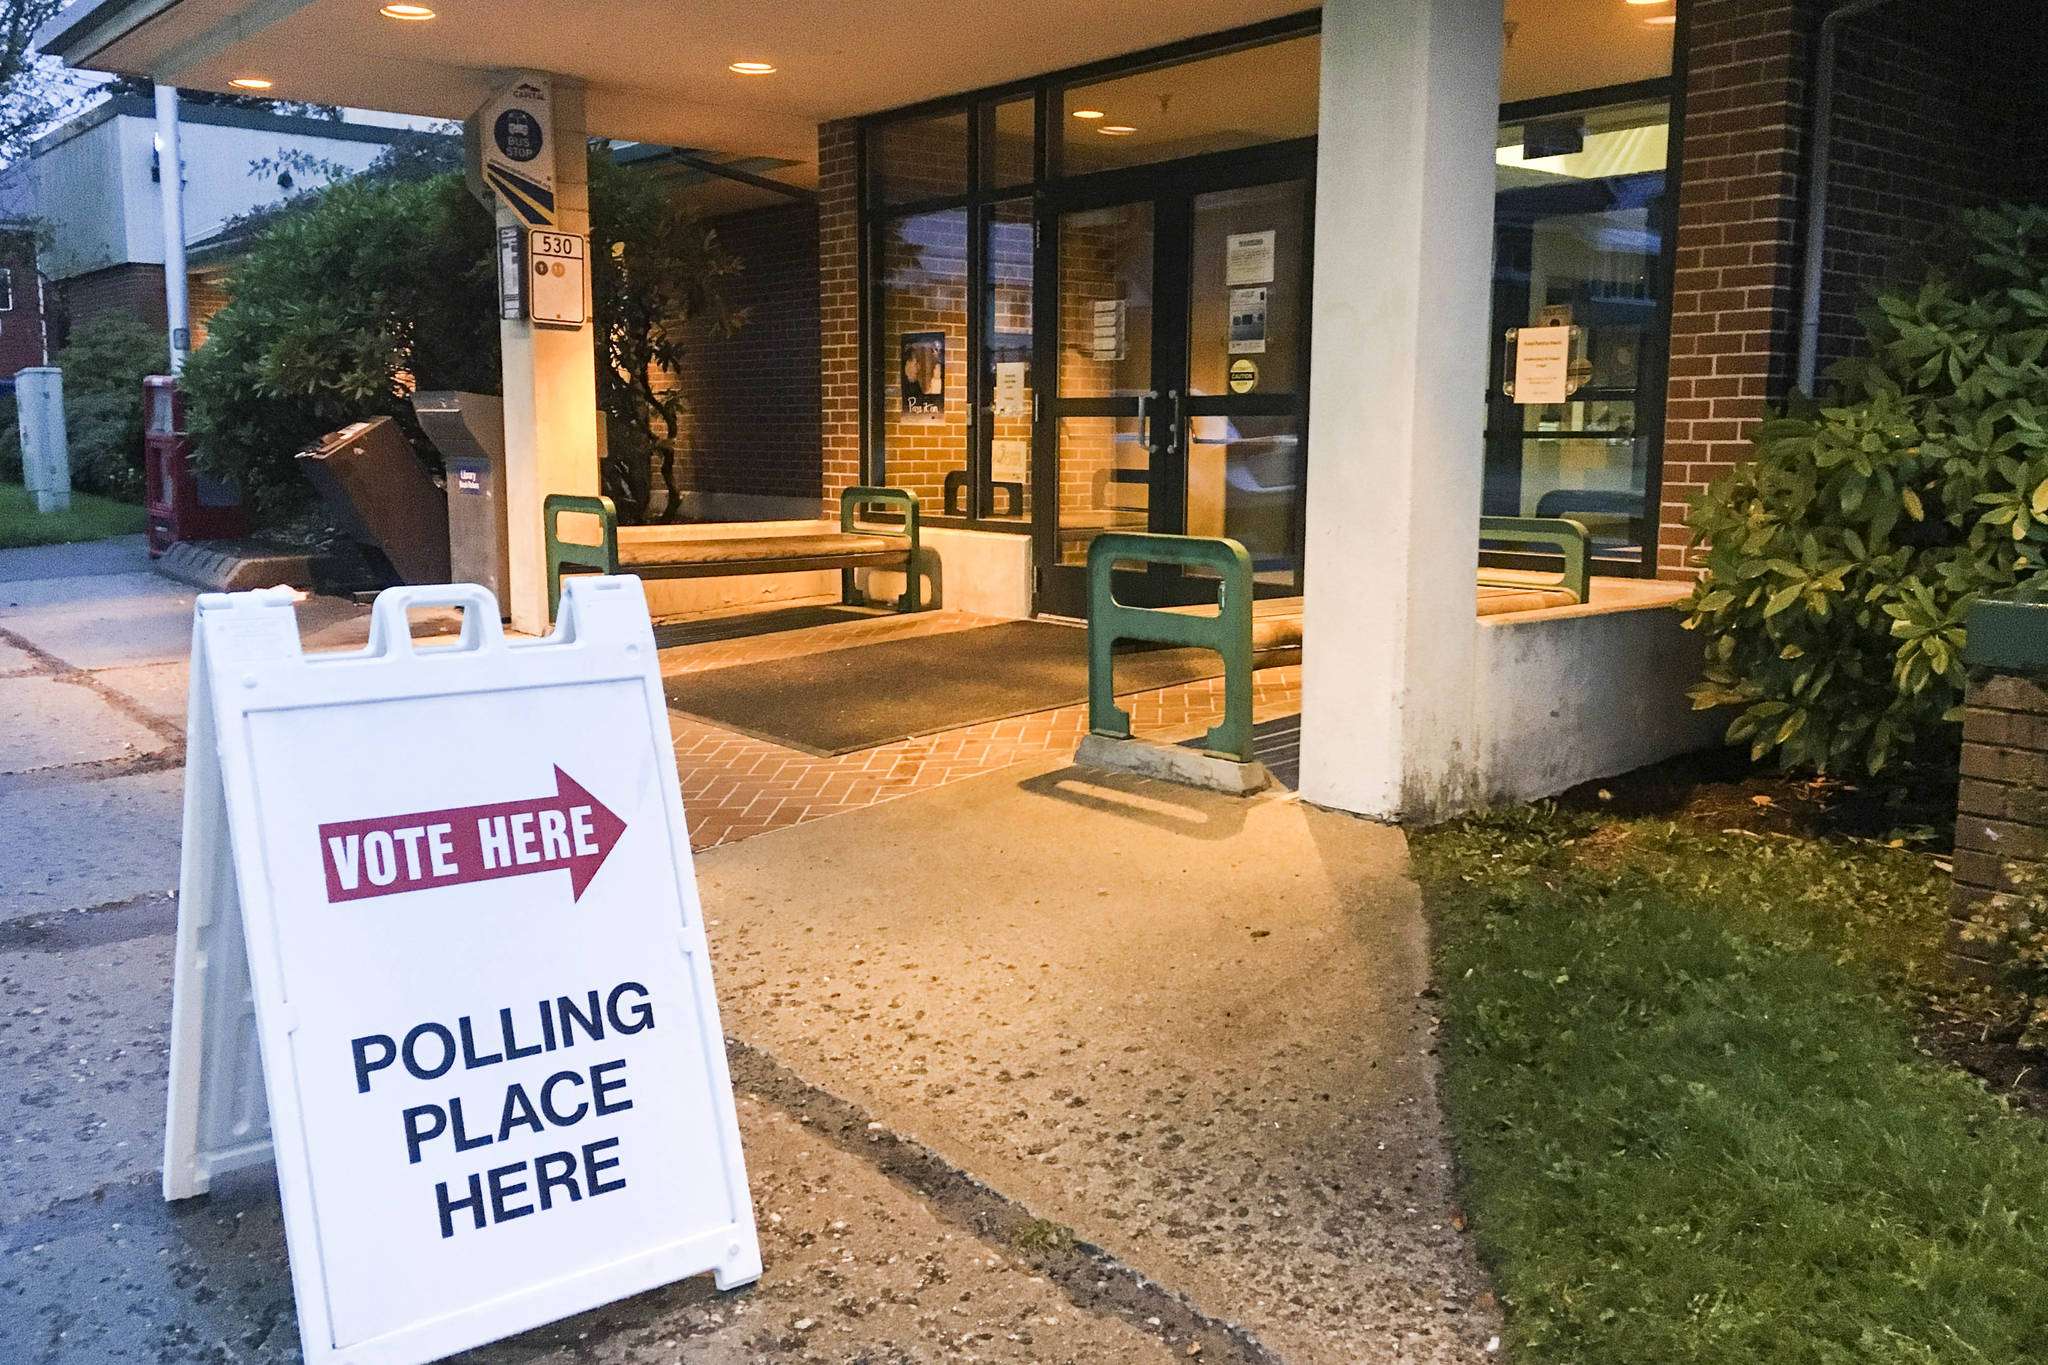 The Douglas Library is one of several voting stations for the convenience of voters during municipal elections on Oct. 1, 2019. Voting is from 7 a.m. to 8 p.m. on Tuesday, Oct. 1, 2019. (Michael S. Lockett | Juneau Empire)